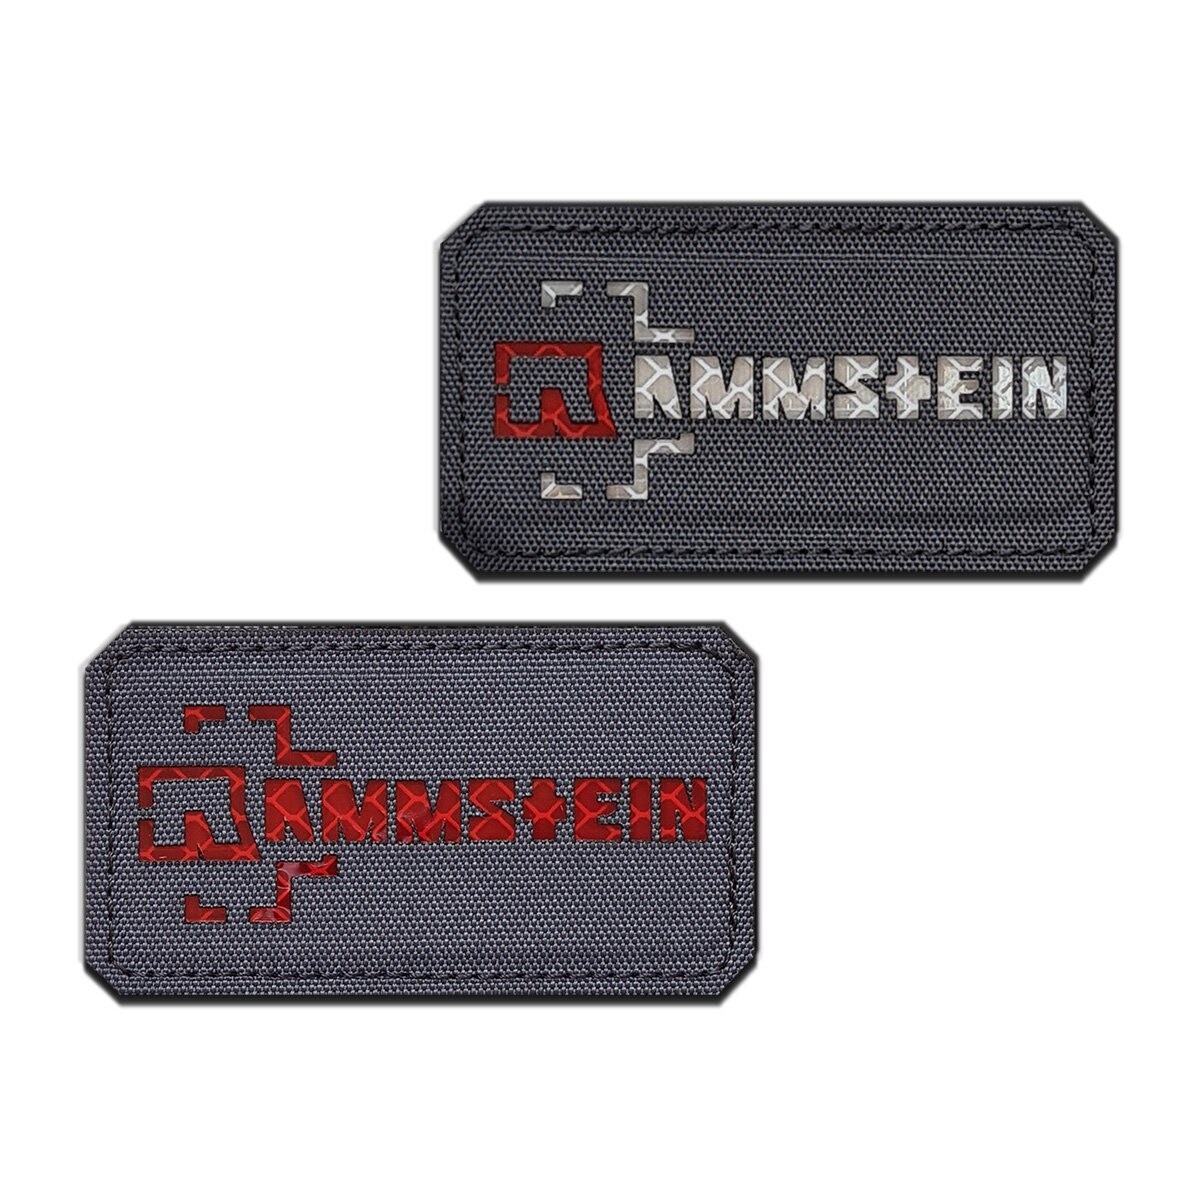 Buy Rammstein Patch Online In India -  India